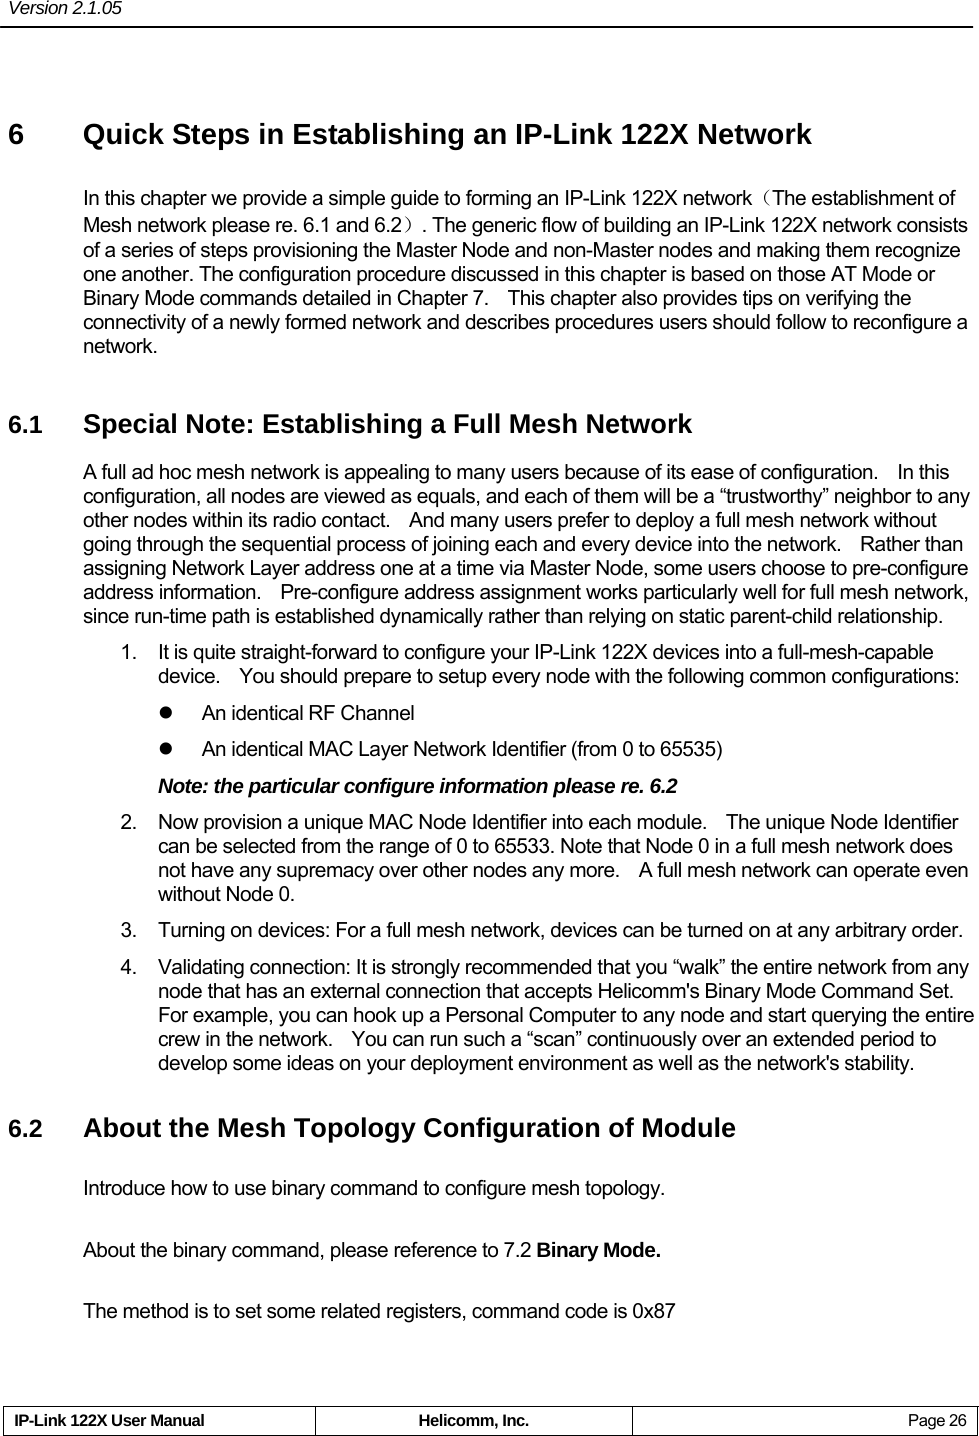 Version 2.1.05     IP-Link 122X User Manual  Helicomm, Inc.  Page 26 6  Quick Steps in Establishing an IP-Link 122X Network In this chapter we provide a simple guide to forming an IP-Link 122X network（The establishment of Mesh network please re. 6.1 and 6.2）. The generic flow of building an IP-Link 122X network consists of a series of steps provisioning the Master Node and non-Master nodes and making them recognize one another. The configuration procedure discussed in this chapter is based on those AT Mode or Binary Mode commands detailed in Chapter 7.    This chapter also provides tips on verifying the connectivity of a newly formed network and describes procedures users should follow to reconfigure a network. 6.1  Special Note: Establishing a Full Mesh Network A full ad hoc mesh network is appealing to many users because of its ease of configuration.    In this configuration, all nodes are viewed as equals, and each of them will be a “trustworthy” neighbor to any other nodes within its radio contact.    And many users prefer to deploy a full mesh network without going through the sequential process of joining each and every device into the network.    Rather than assigning Network Layer address one at a time via Master Node, some users choose to pre-configure address information.    Pre-configure address assignment works particularly well for full mesh network, since run-time path is established dynamically rather than relying on static parent-child relationship. 1.  It is quite straight-forward to configure your IP-Link 122X devices into a full-mesh-capable device.    You should prepare to setup every node with the following common configurations: z  An identical RF Channel z  An identical MAC Layer Network Identifier (from 0 to 65535) Note: the particular configure information please re. 6.2 2.  Now provision a unique MAC Node Identifier into each module.    The unique Node Identifier can be selected from the range of 0 to 65533. Note that Node 0 in a full mesh network does not have any supremacy over other nodes any more.    A full mesh network can operate even without Node 0.   3.  Turning on devices: For a full mesh network, devices can be turned on at any arbitrary order. 4.  Validating connection: It is strongly recommended that you “walk” the entire network from any node that has an external connection that accepts Helicomm&apos;s Binary Mode Command Set.   For example, you can hook up a Personal Computer to any node and start querying the entire crew in the network.    You can run such a “scan” continuously over an extended period to develop some ideas on your deployment environment as well as the network&apos;s stability. 6.2  About the Mesh Topology Configuration of Module Introduce how to use binary command to configure mesh topology. About the binary command, please reference to 7.2 Binary Mode. The method is to set some related registers, command code is 0x87 